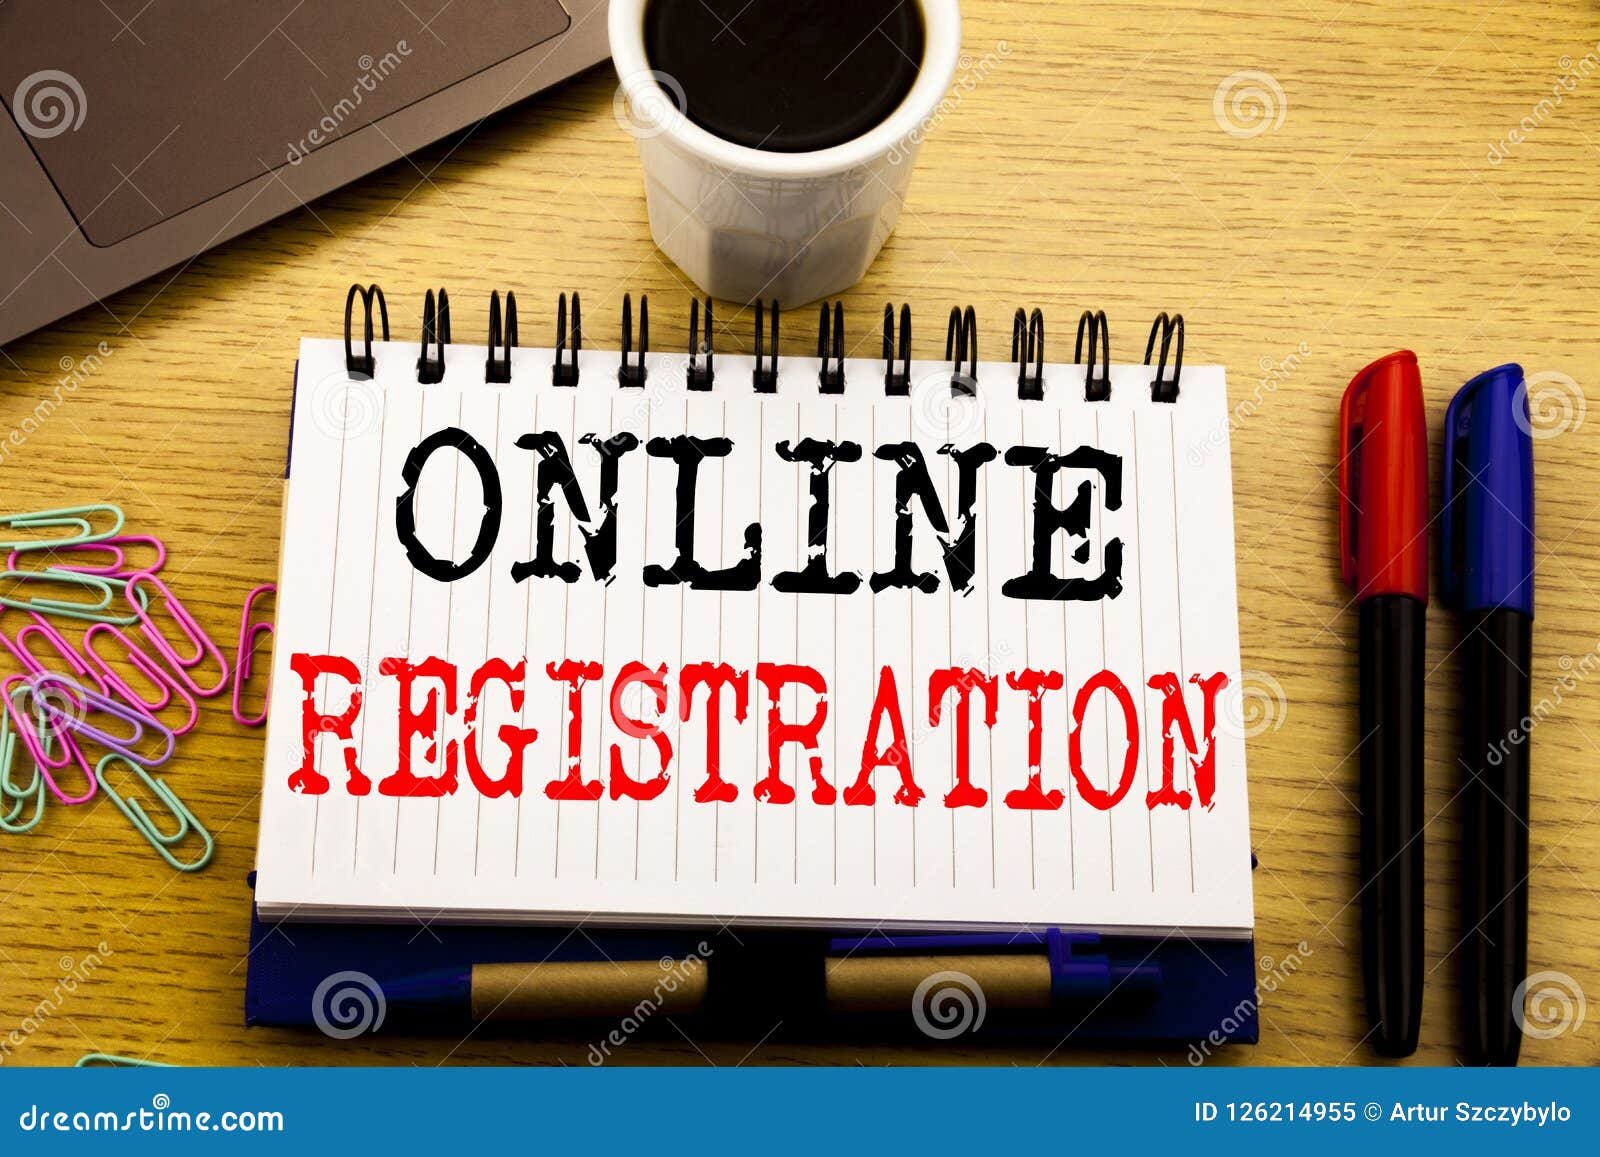 Hand Writing Text Caption Showing Online Registration Business